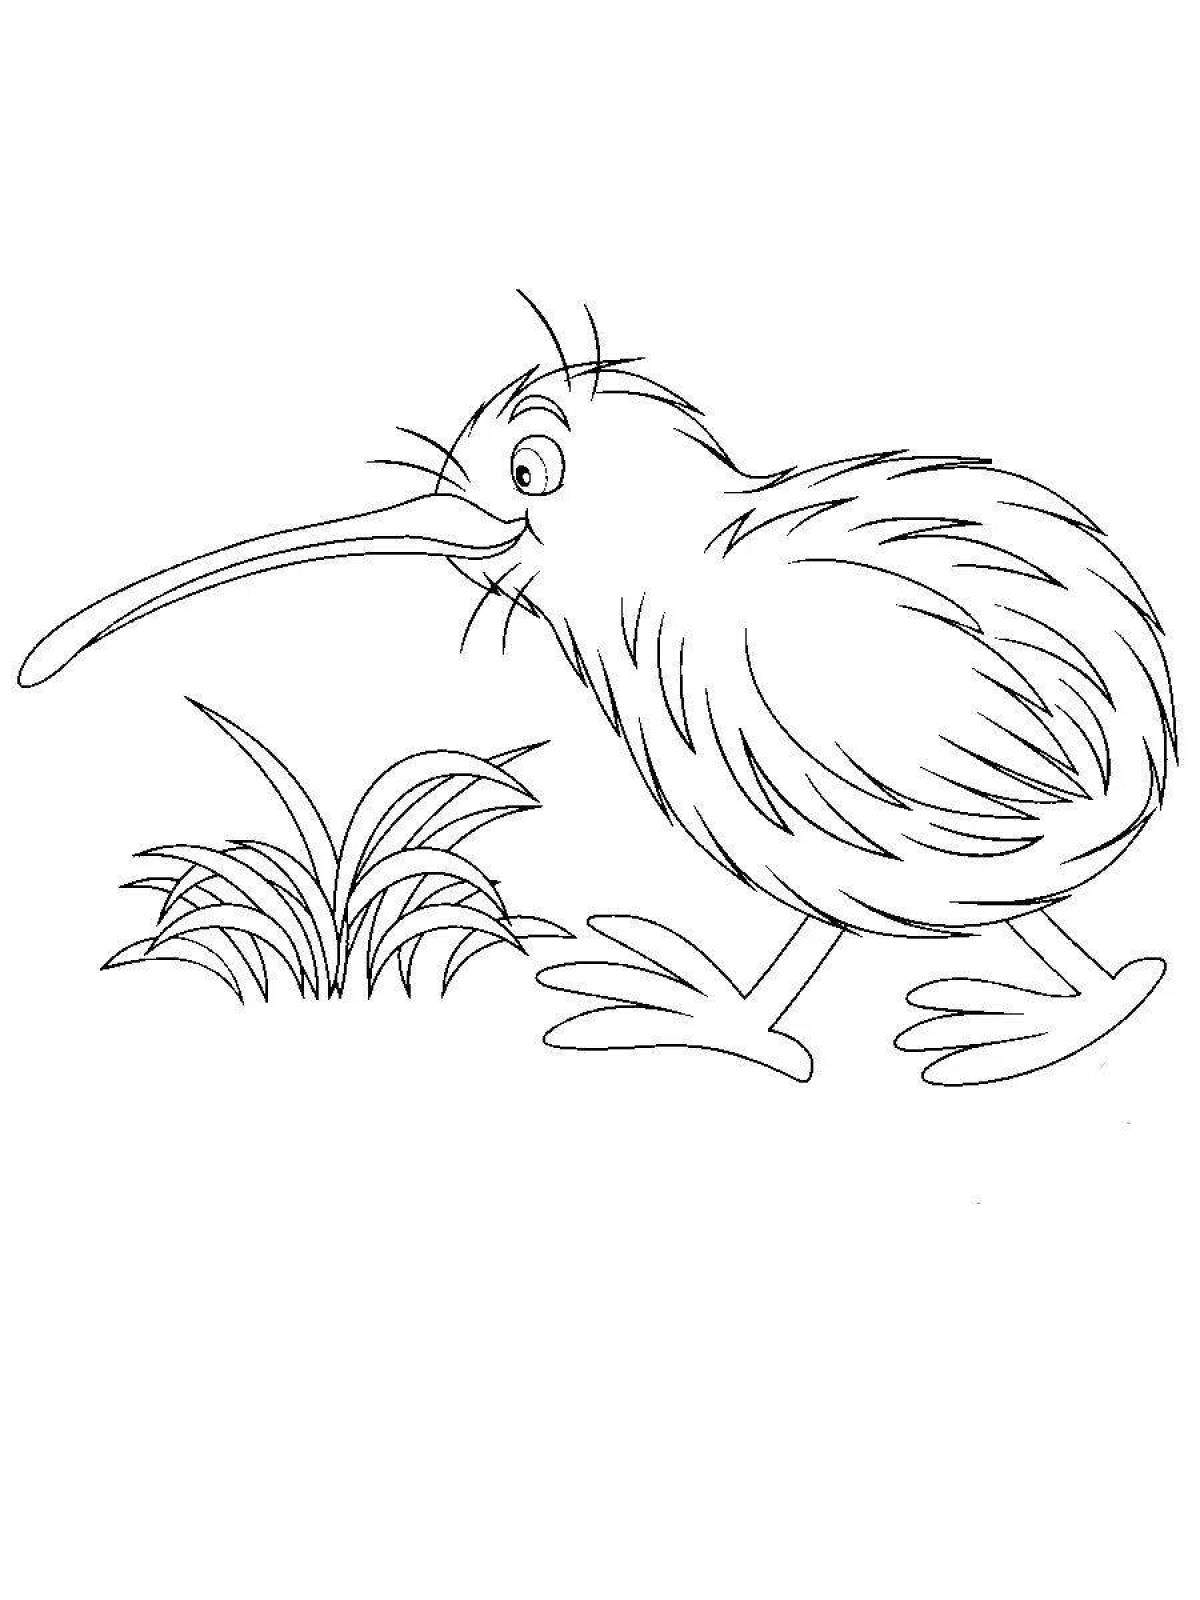 Animated kiwi willy coloring page